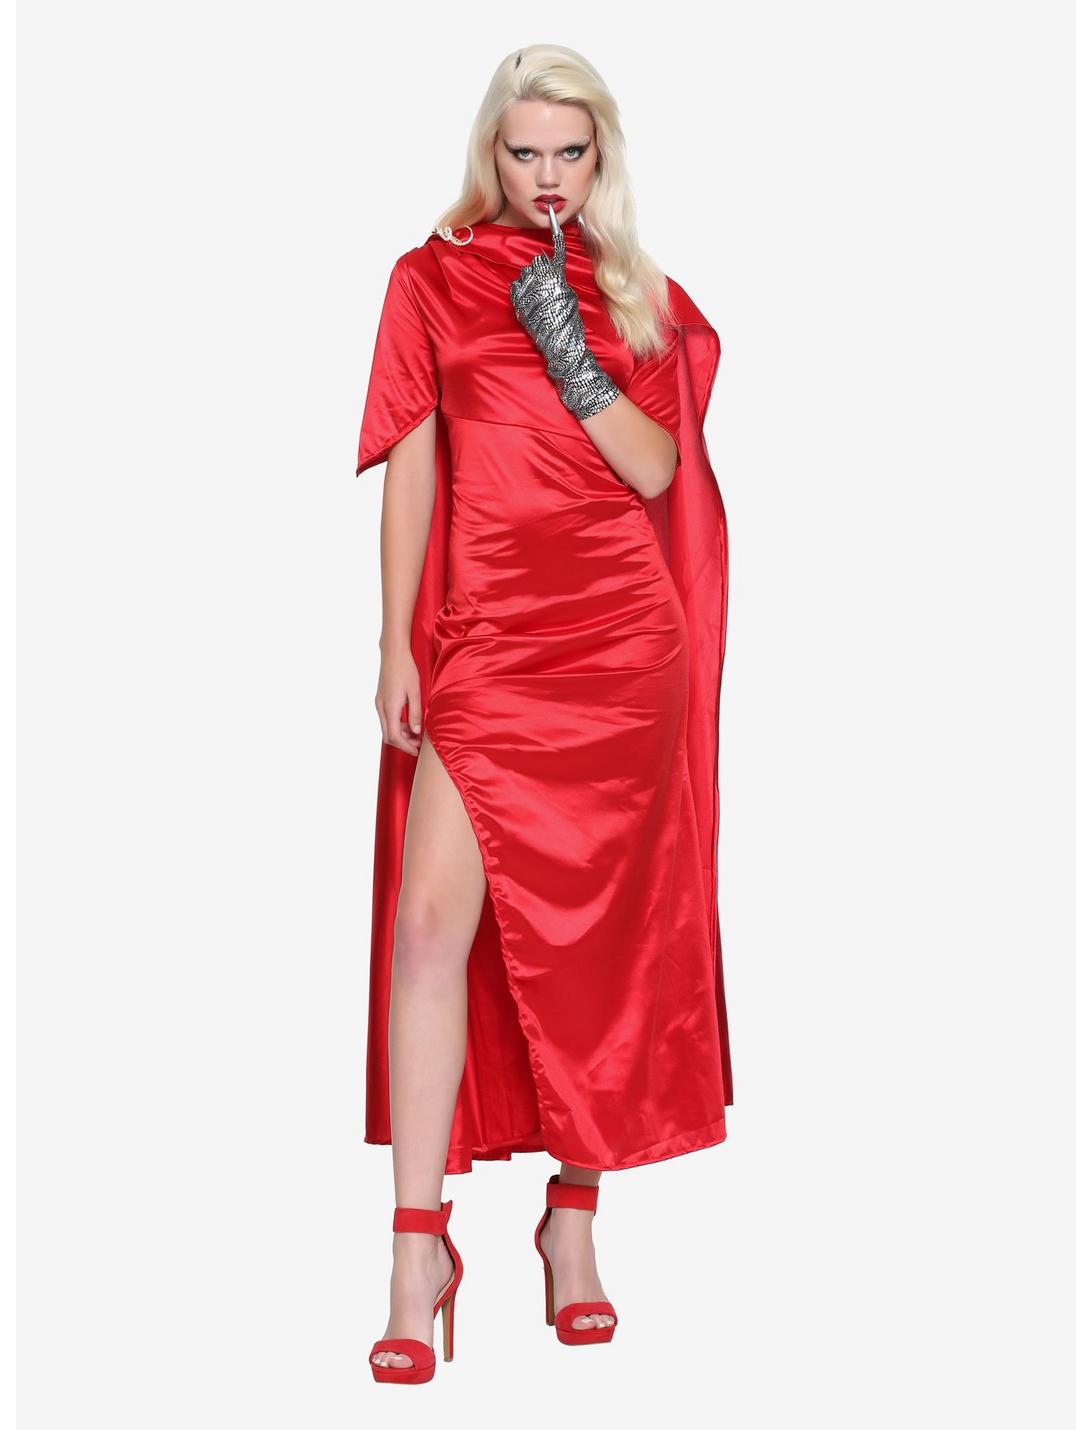 American Horror Story The Countess Costume, RED, hi-res